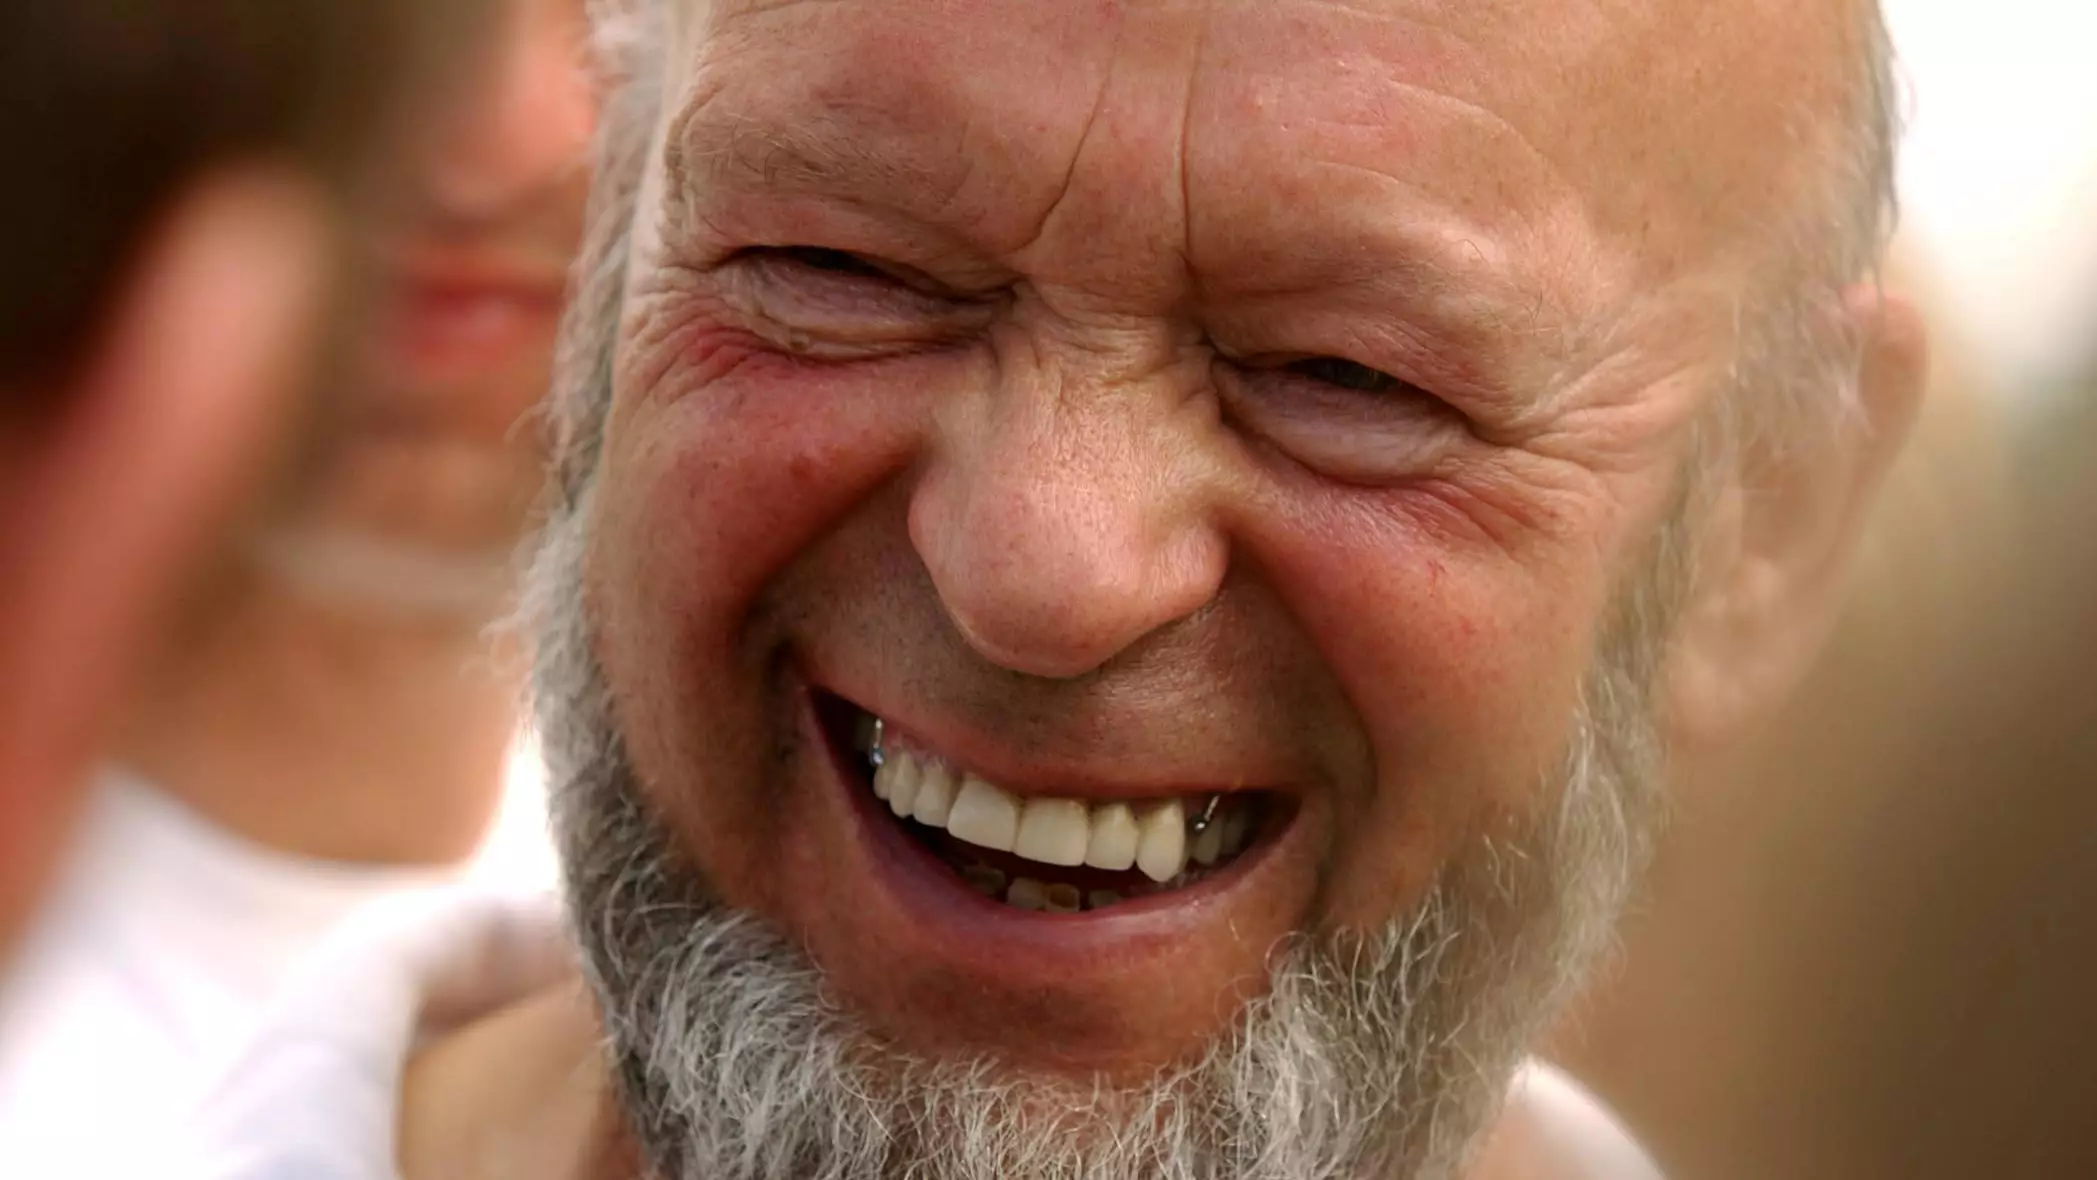 Michael Eavis Donates £2 Million To Charity Every Year